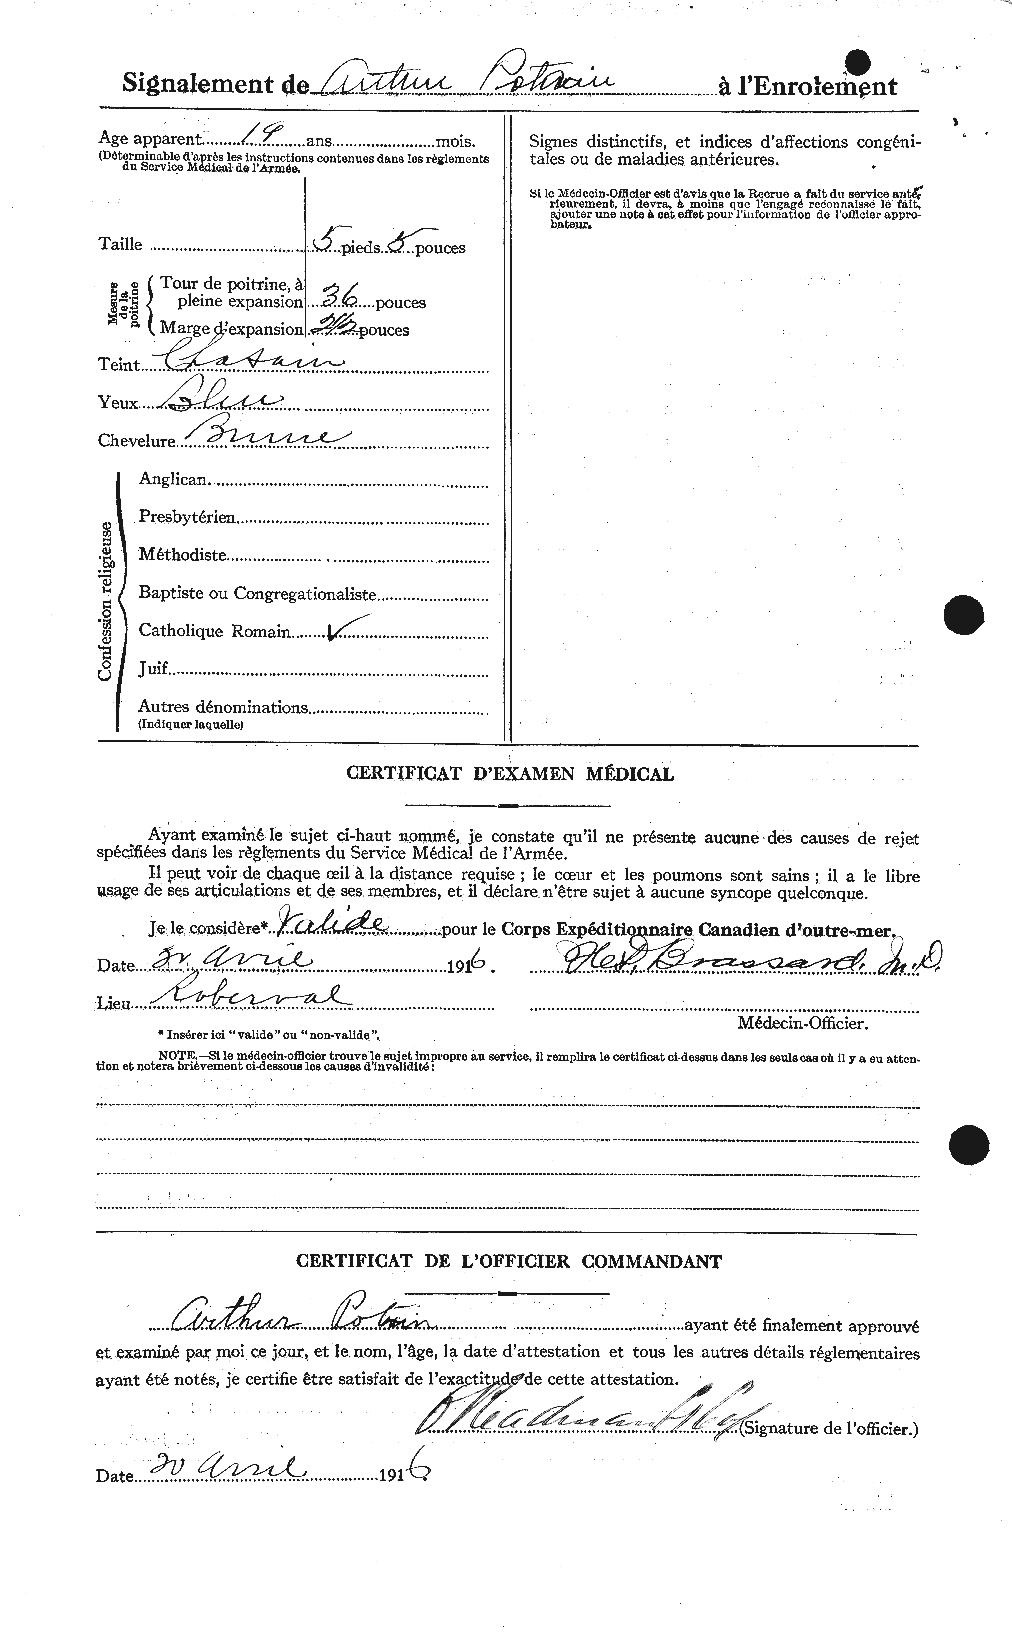 Personnel Records of the First World War - CEF 584613b